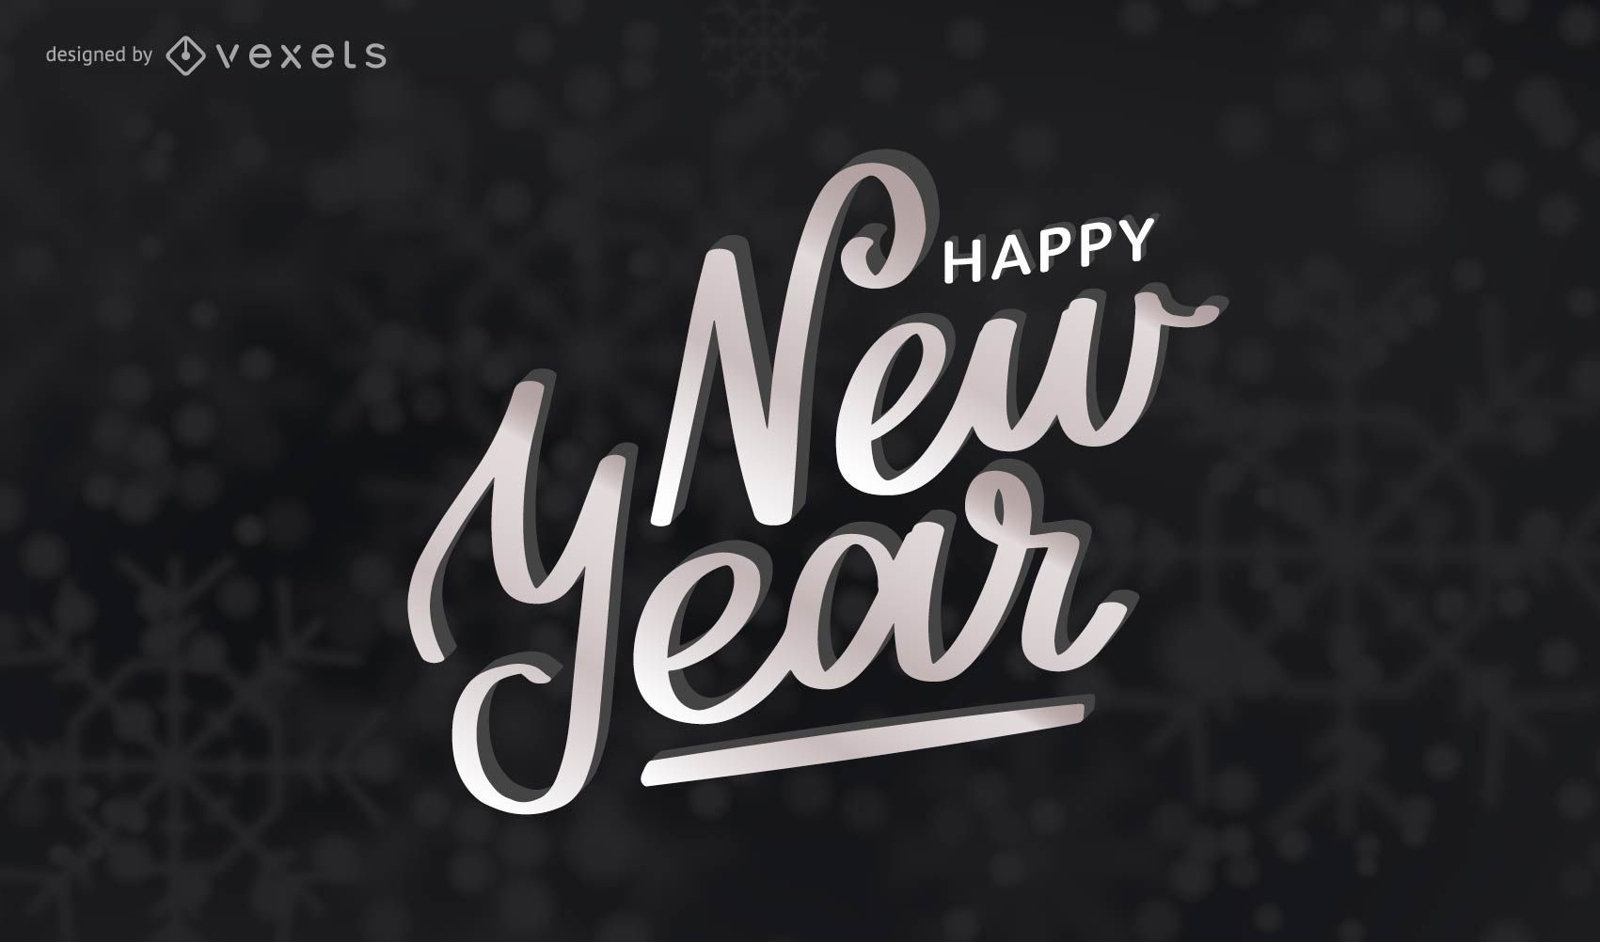 Happy New Year artistic lettering